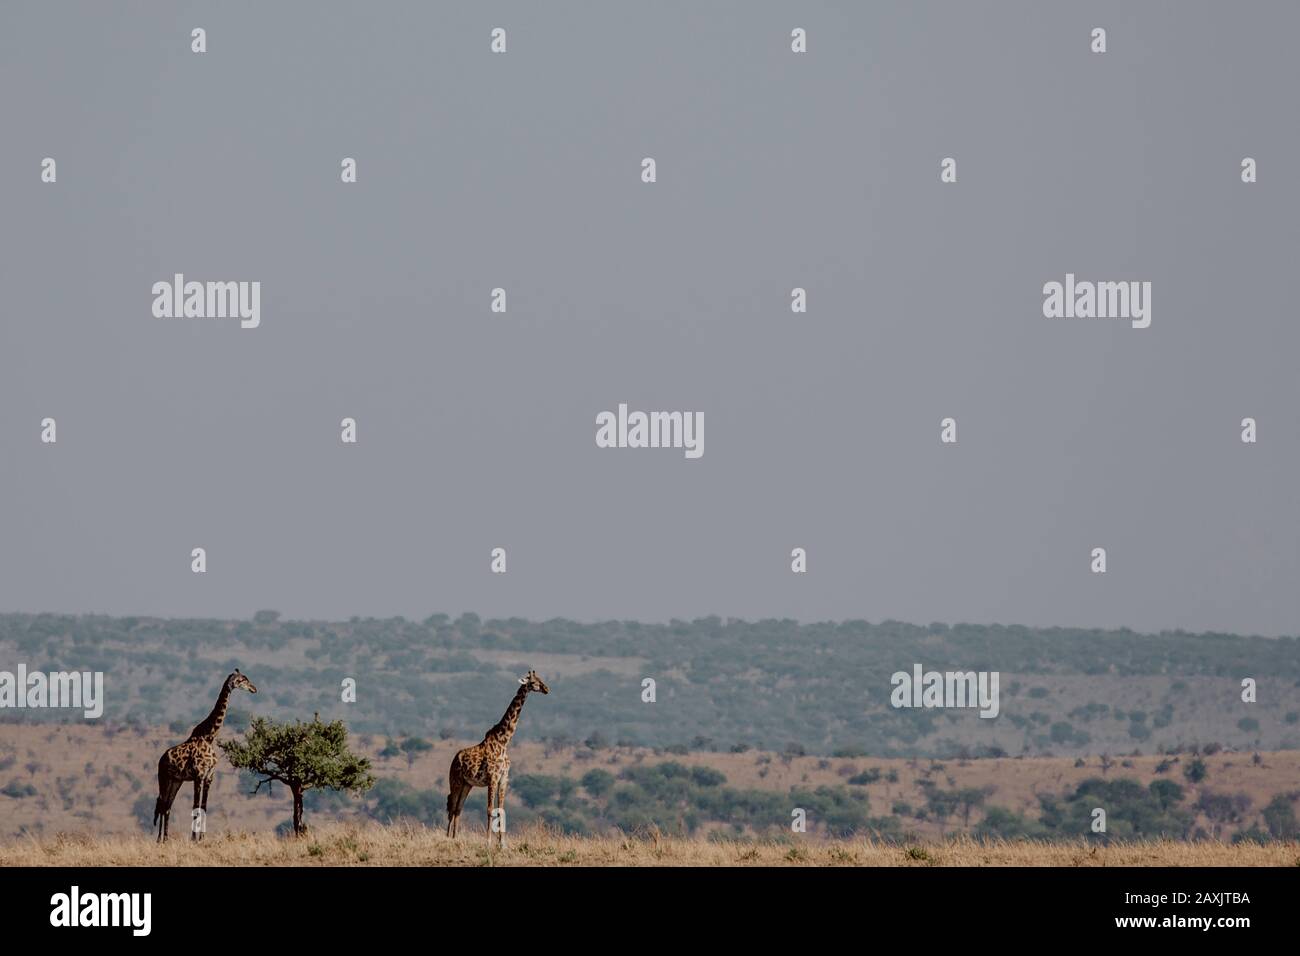 two giraffes standing next to a little tree in the savannah at the bottom left of the picture, Serengeti National Park, Tanzania Stock Photo